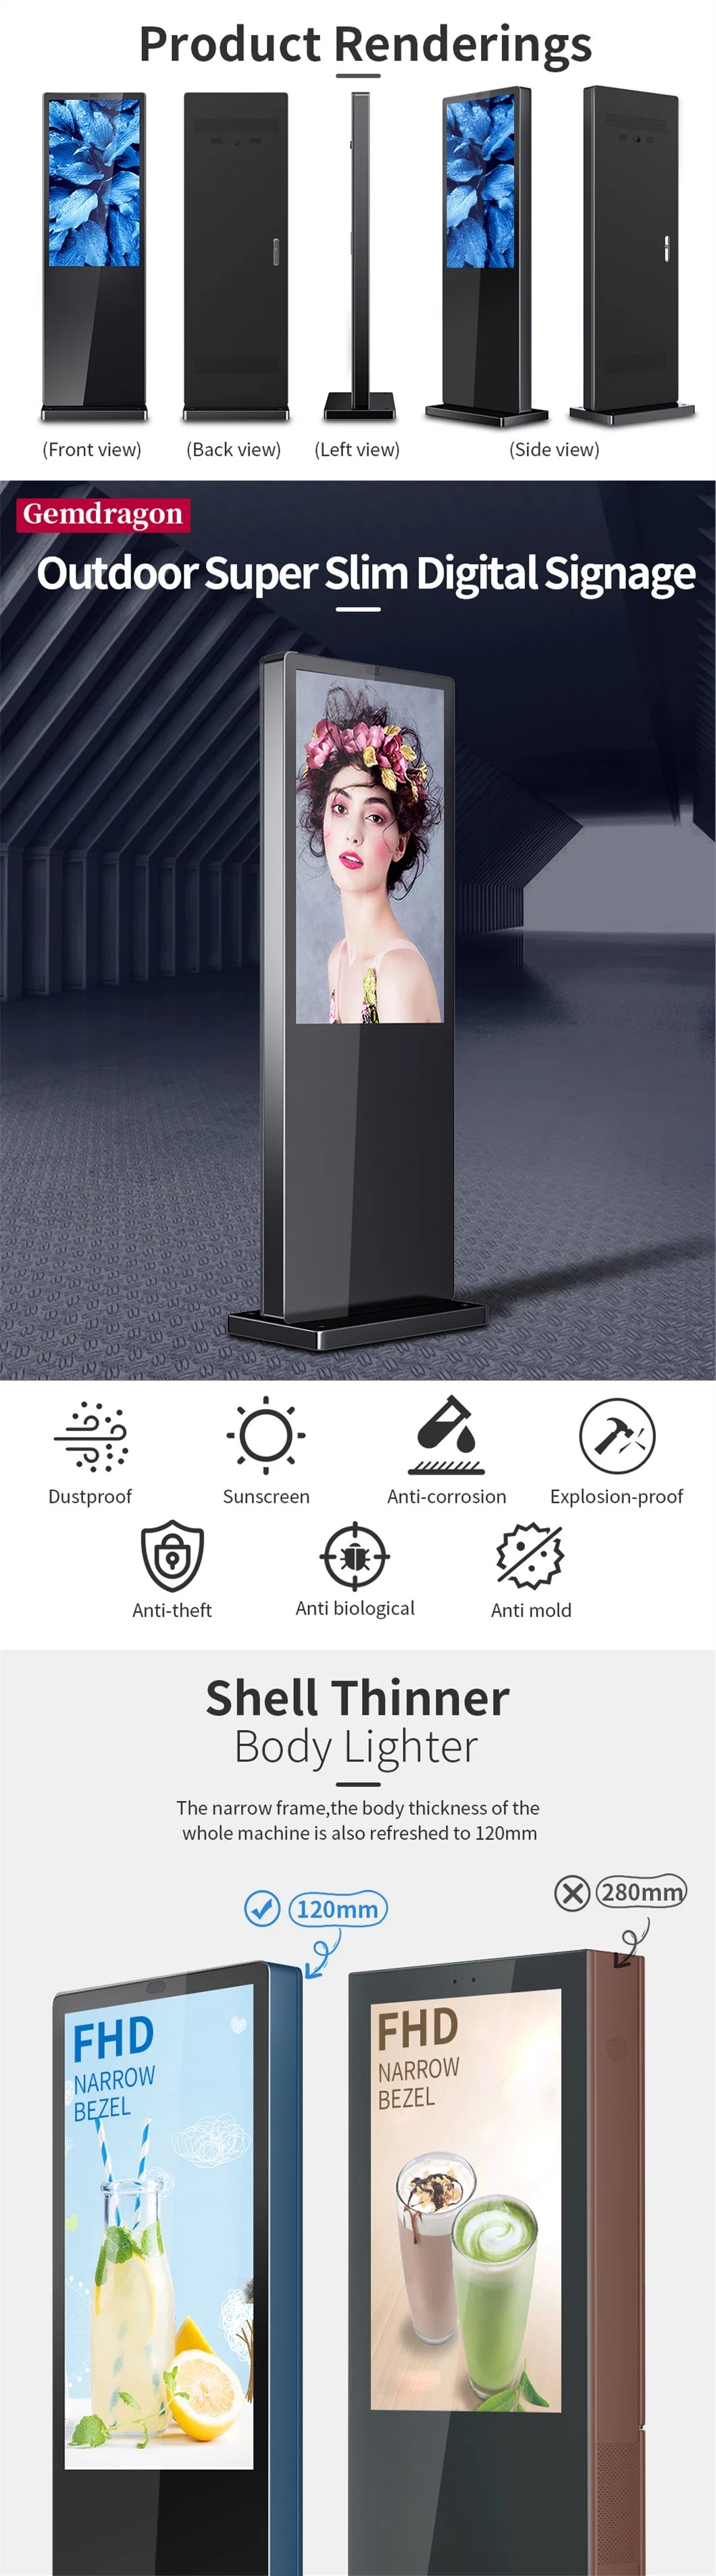 Automatic Brightness Adjustment Android Network Player Floor Stand Outdoor Digital Signage Advertising Banners Touchscreen Kiosk Outdoor TV Monitor